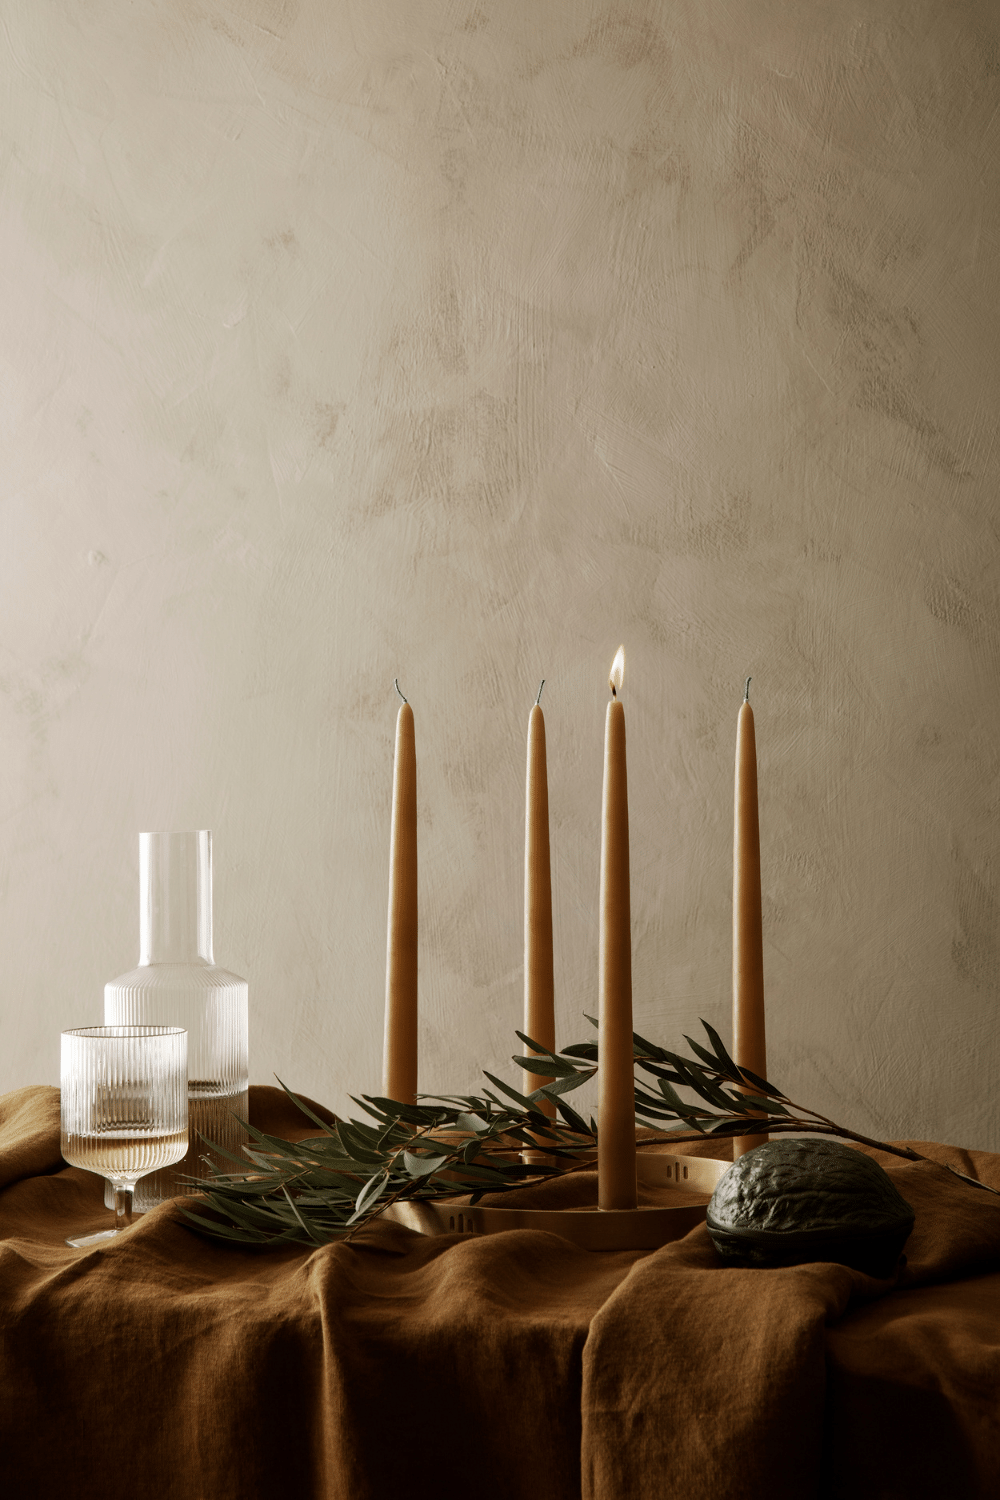 Nordic inspired table setting with glasses and natural coloured candles, perfect for a Scandinavian table setting